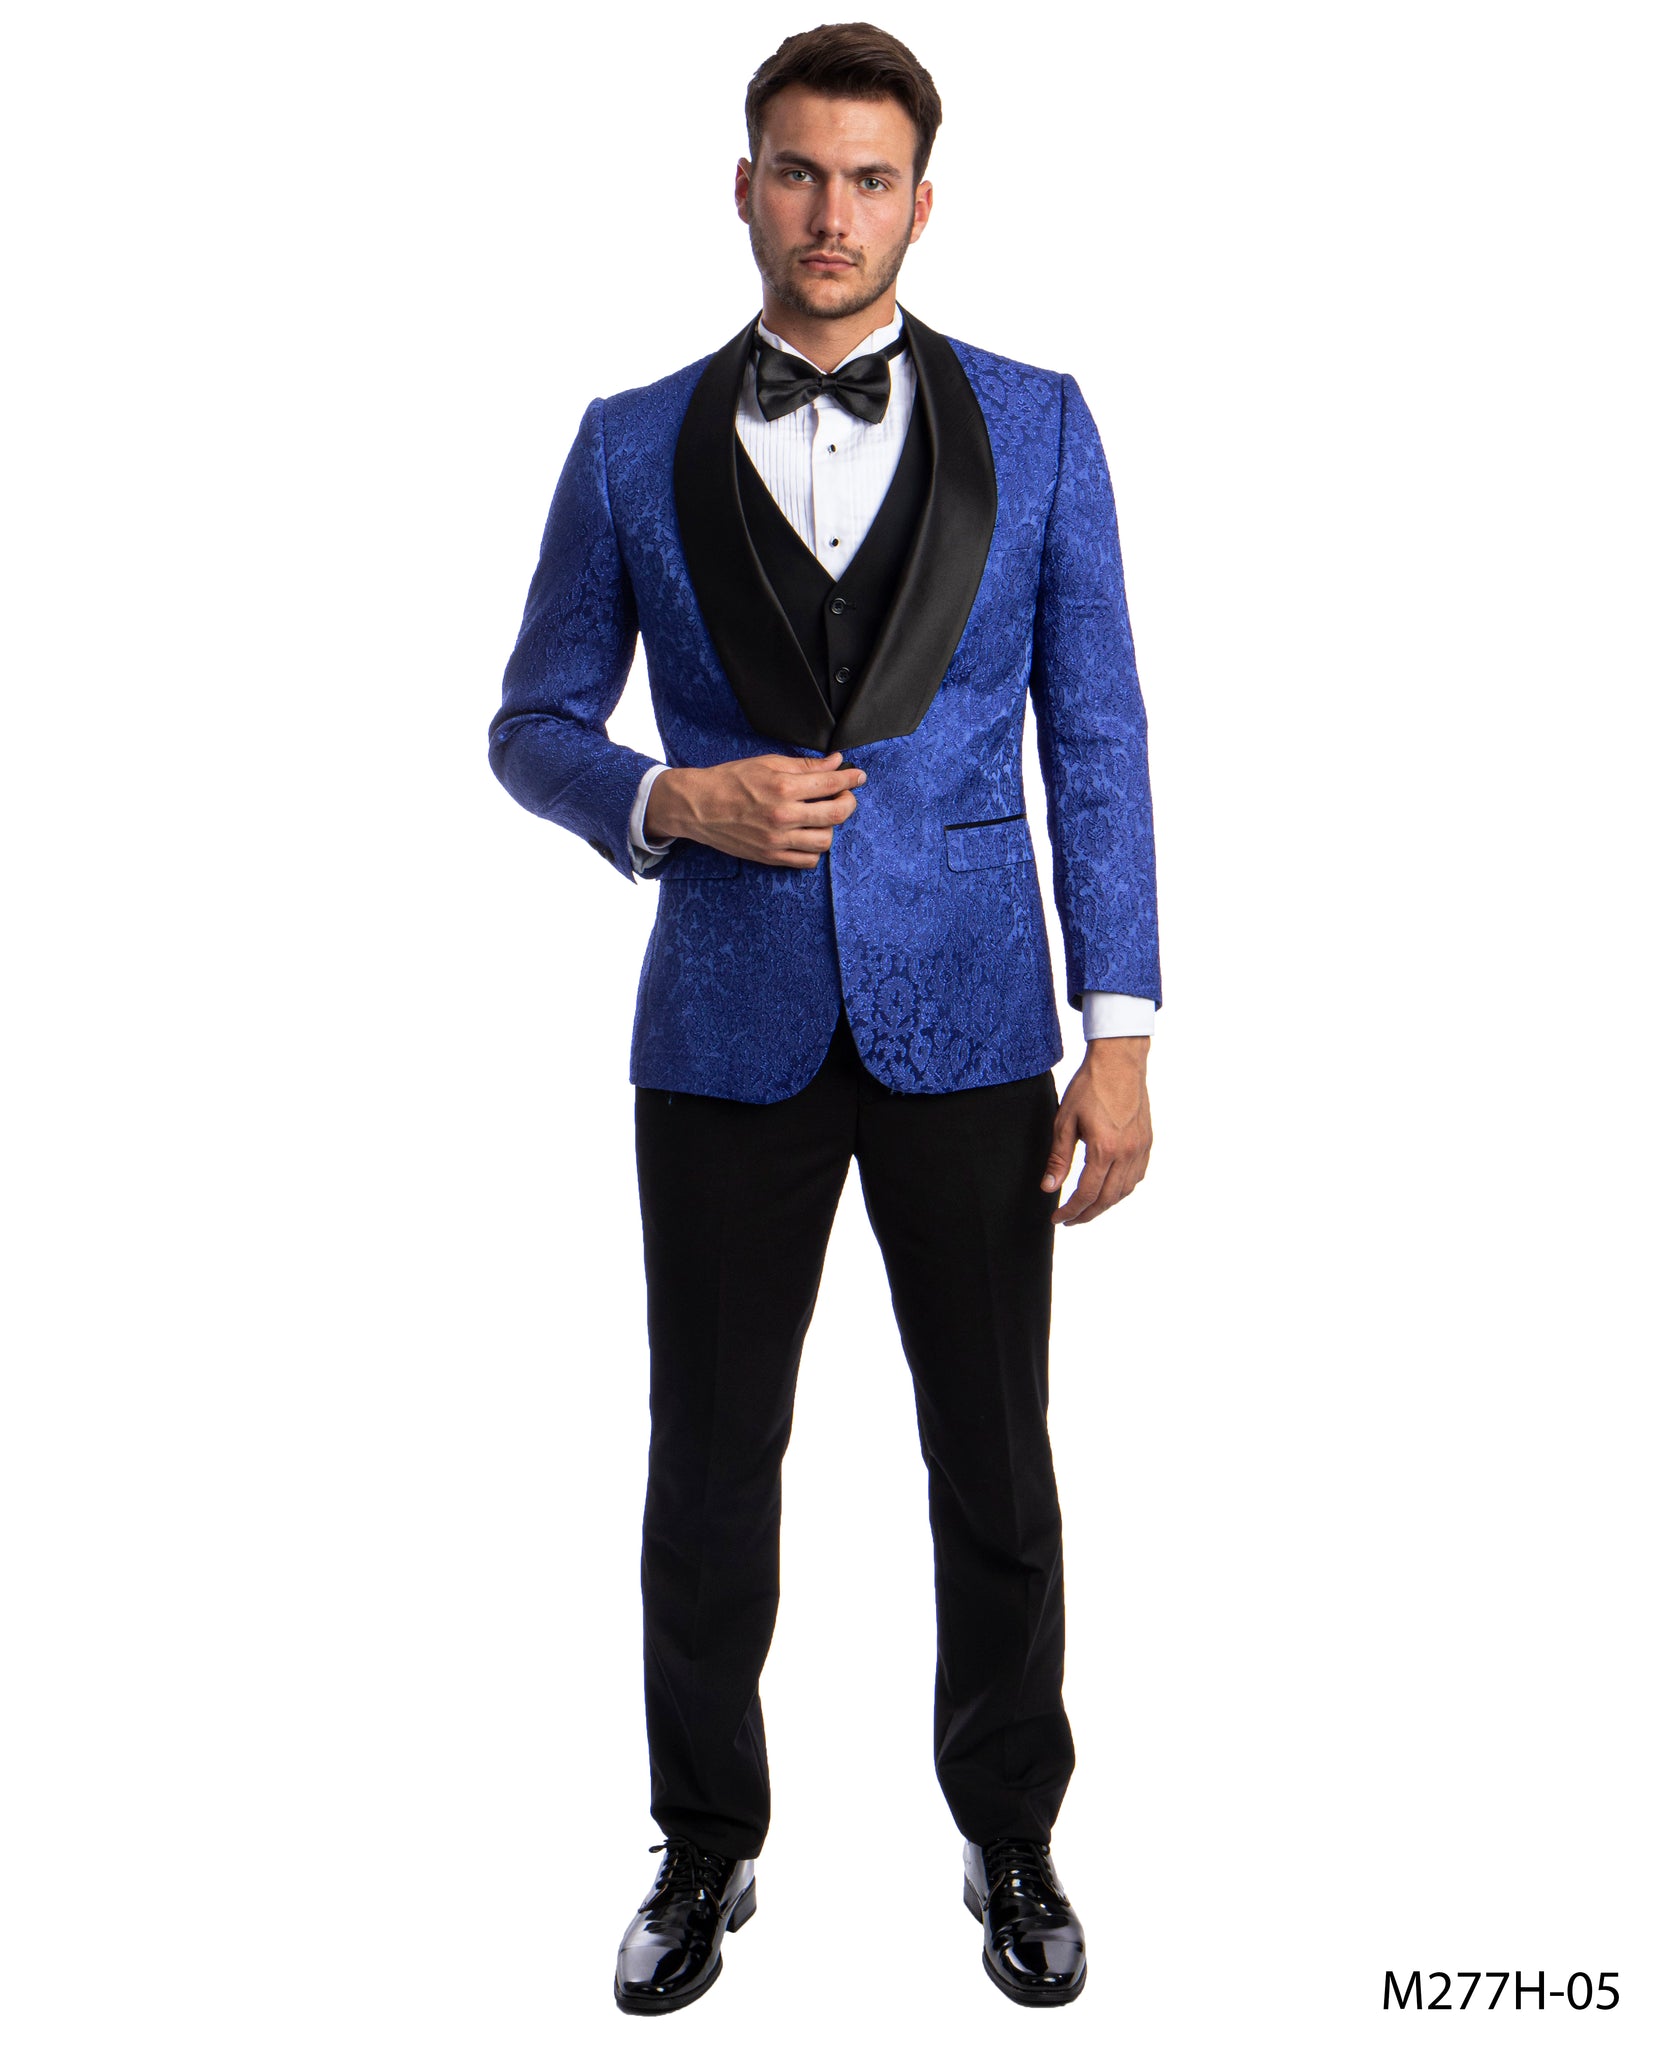 Royal Suit For Men Formal Suits For All Ocassions